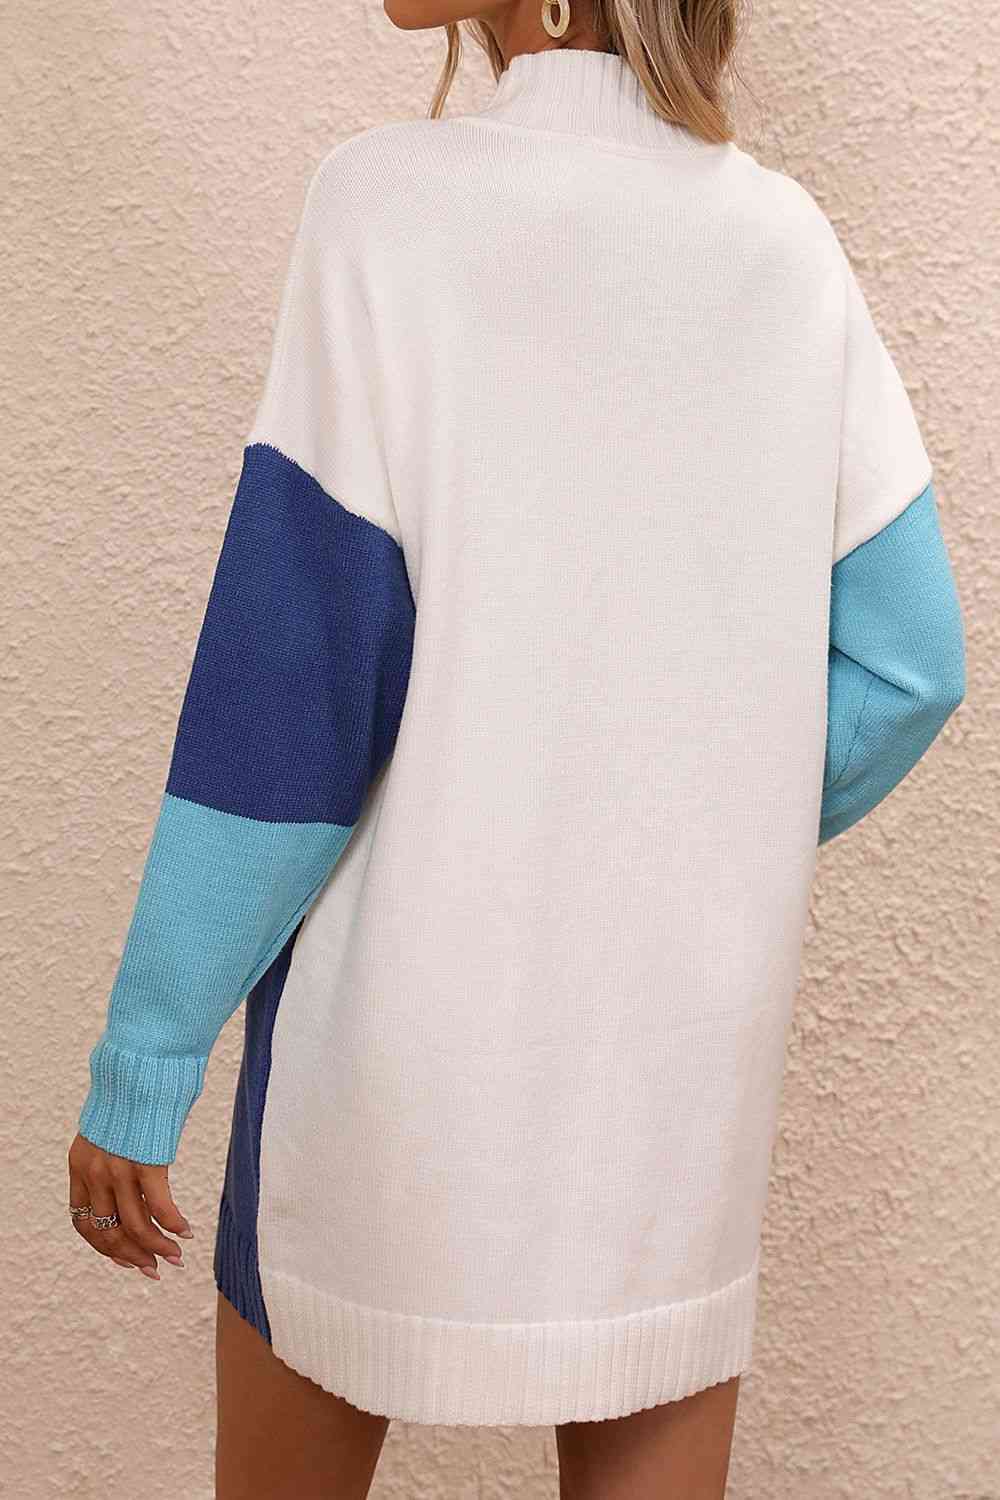 a woman wearing a white and blue sweater